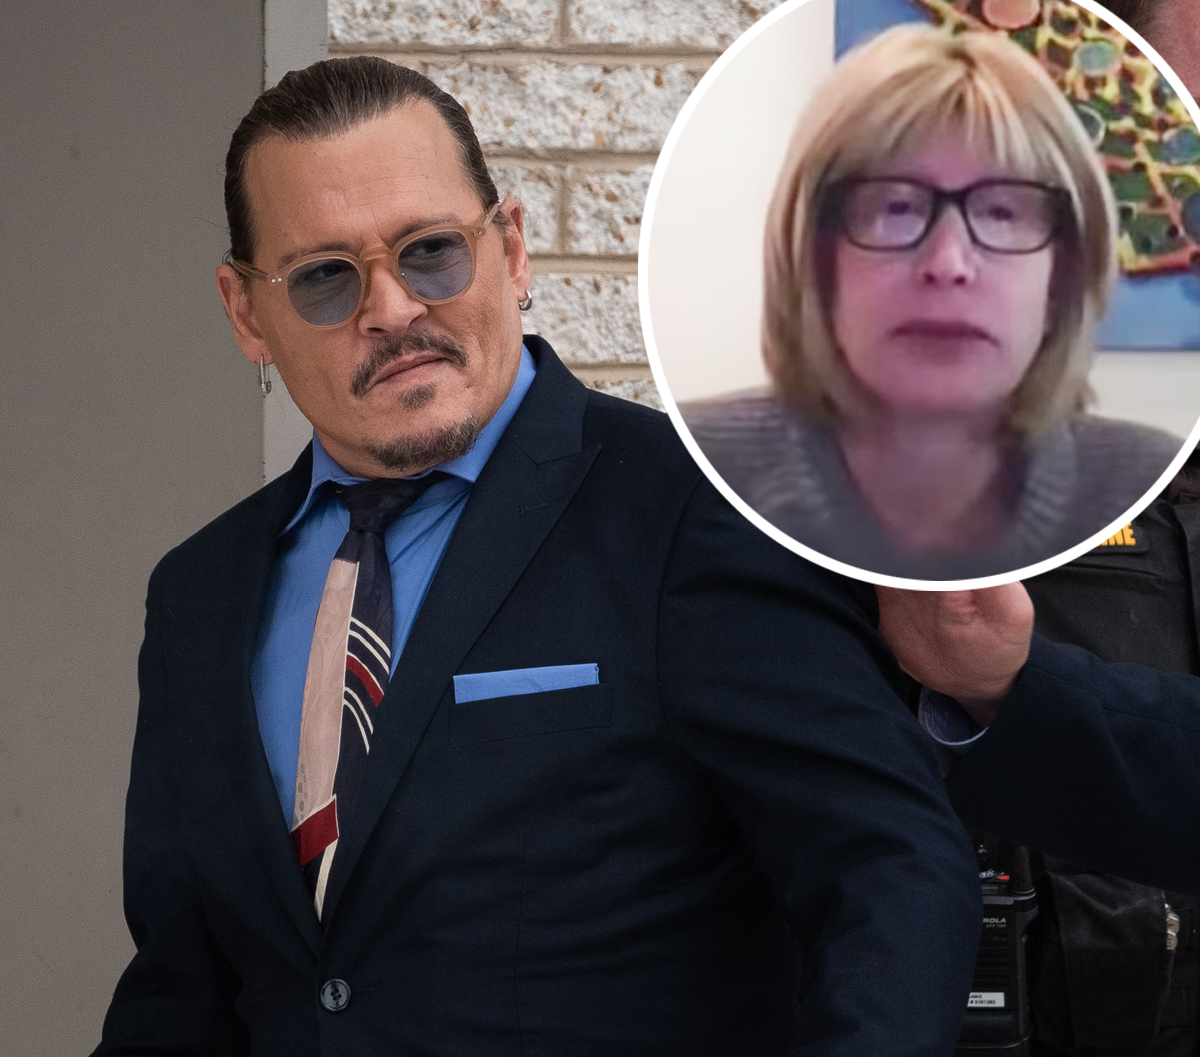 #From Glowing Reputation To Darkness: Johnny Depp’s Former Agent Details ‘Unprofessional Behavior’ That She Believes Destroyed His Hollywood Career